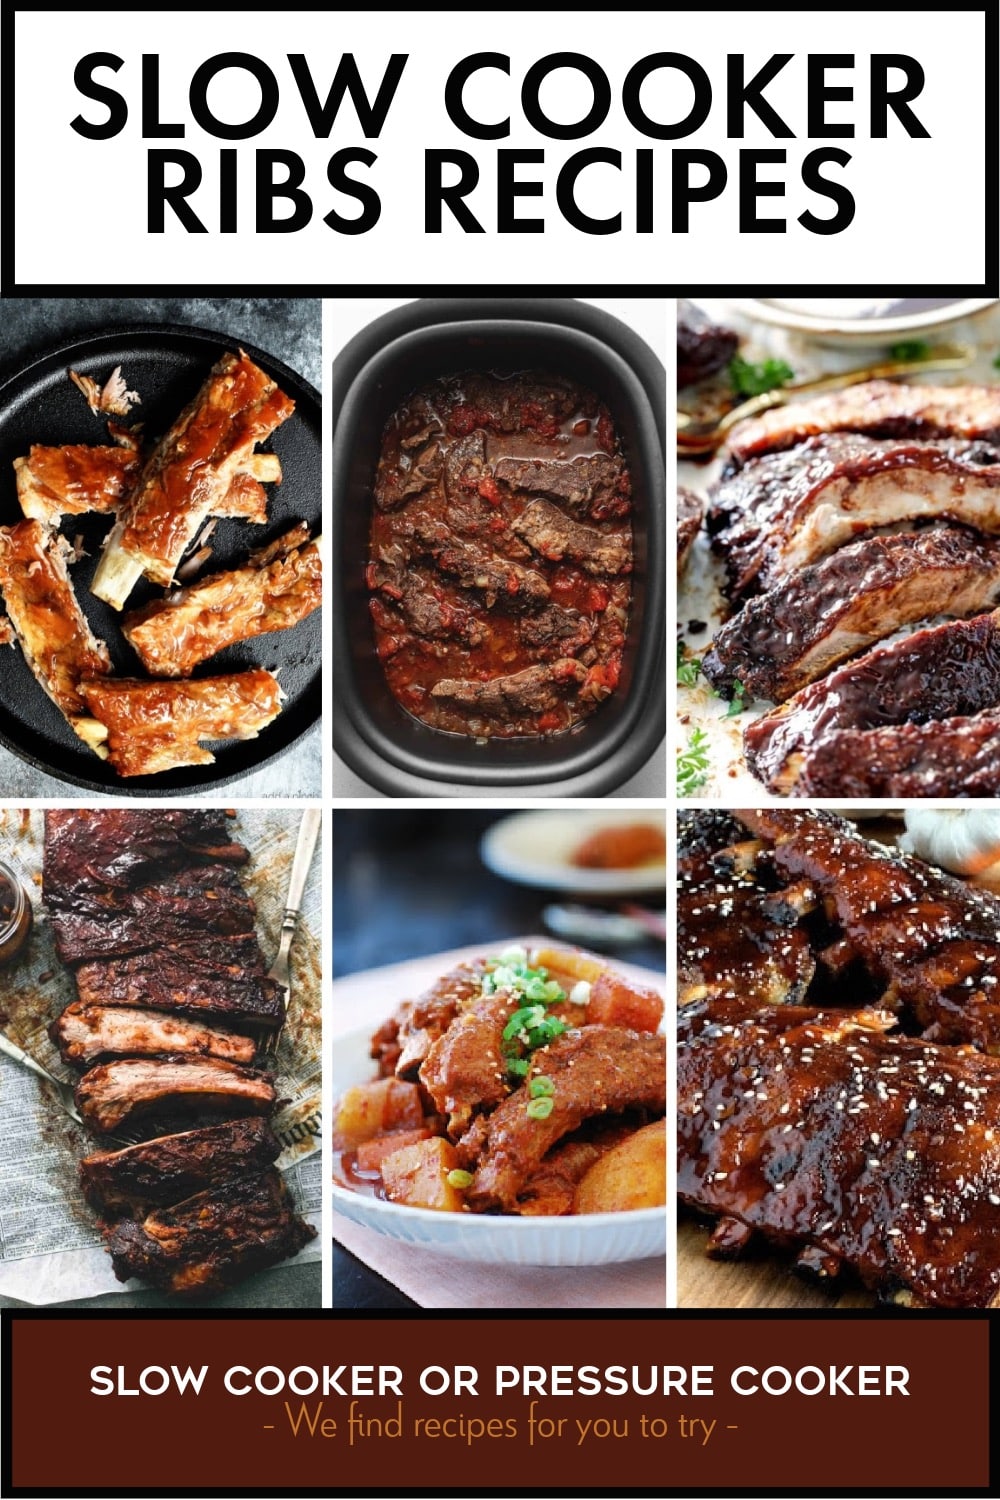 Pinterest image of Slow Cooker Ribs Recipes